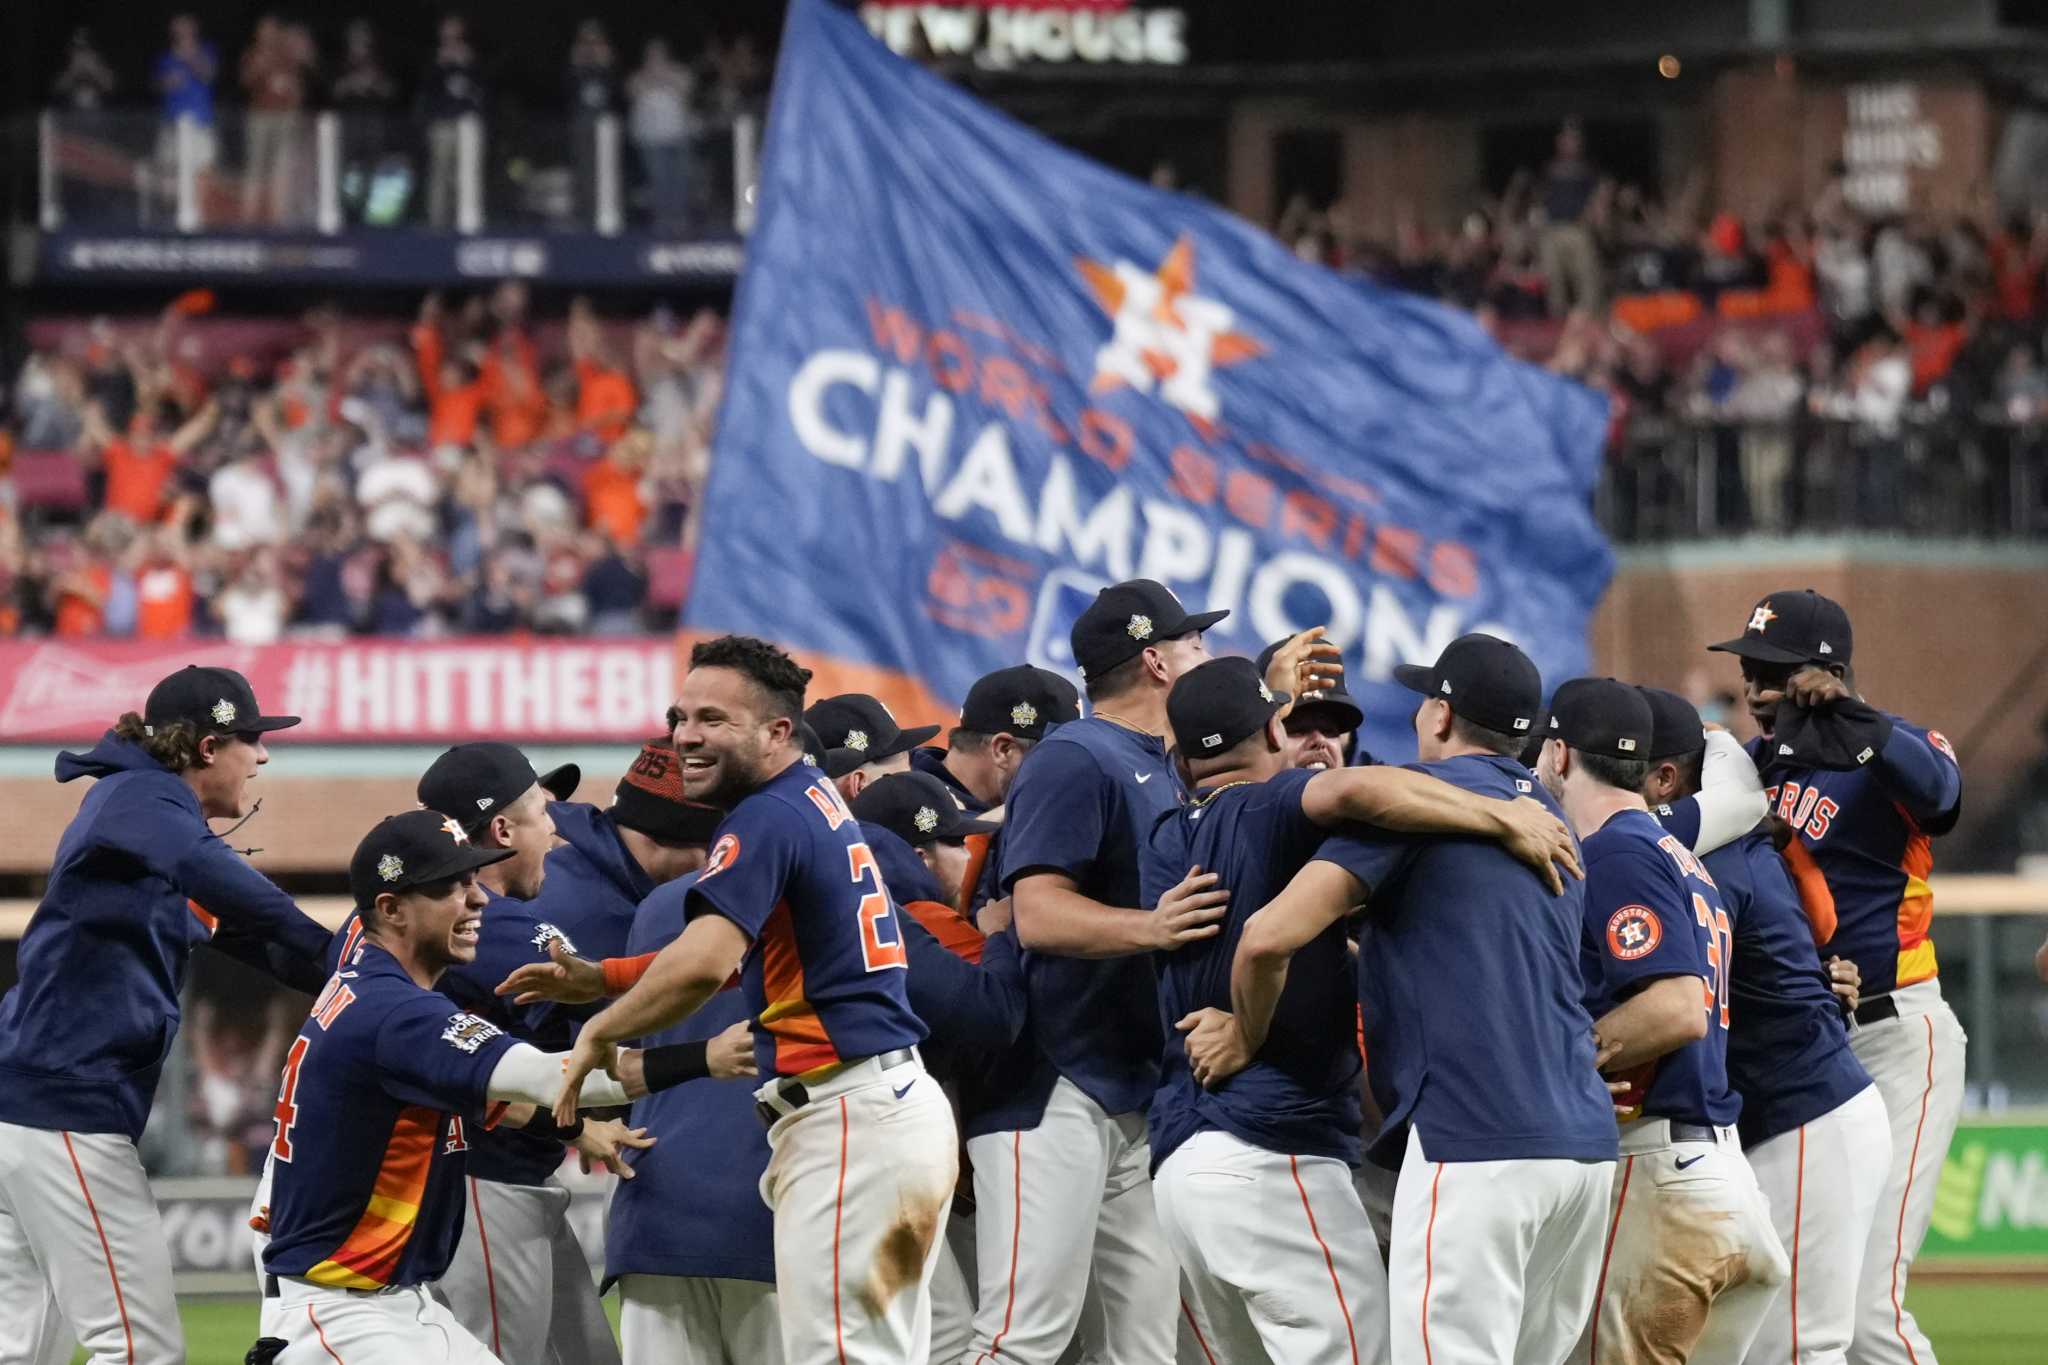 World Series: Houston Astros set a record for merchandise sales